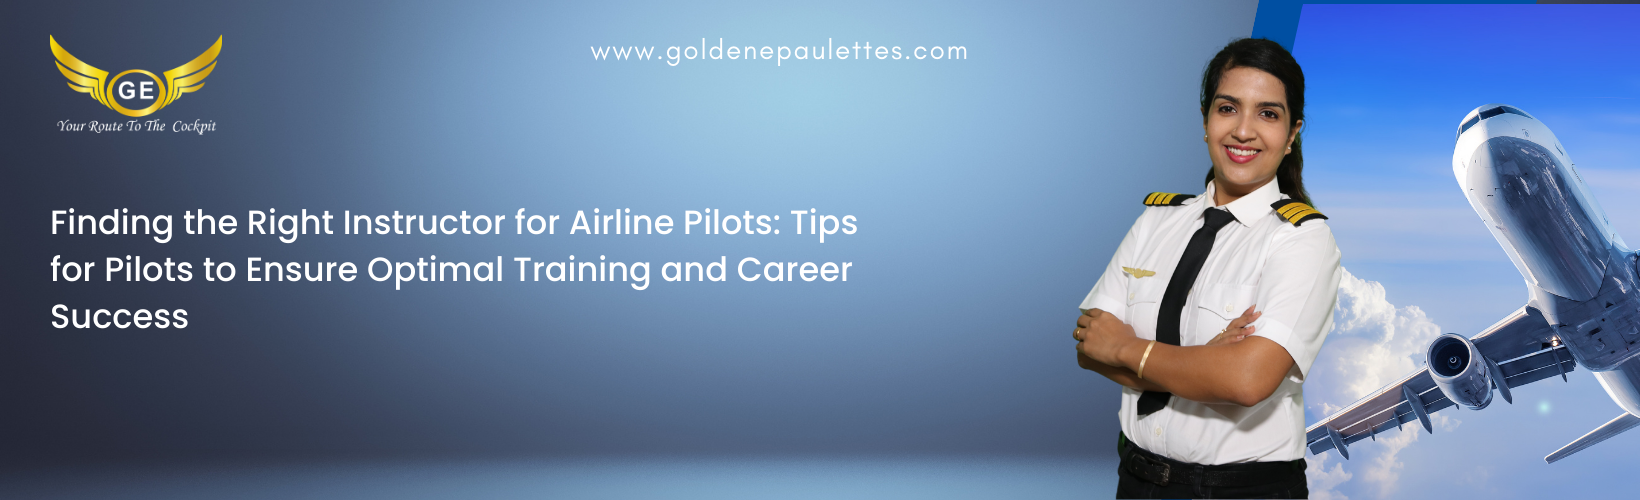 Exam Strategies for Airline Pilots